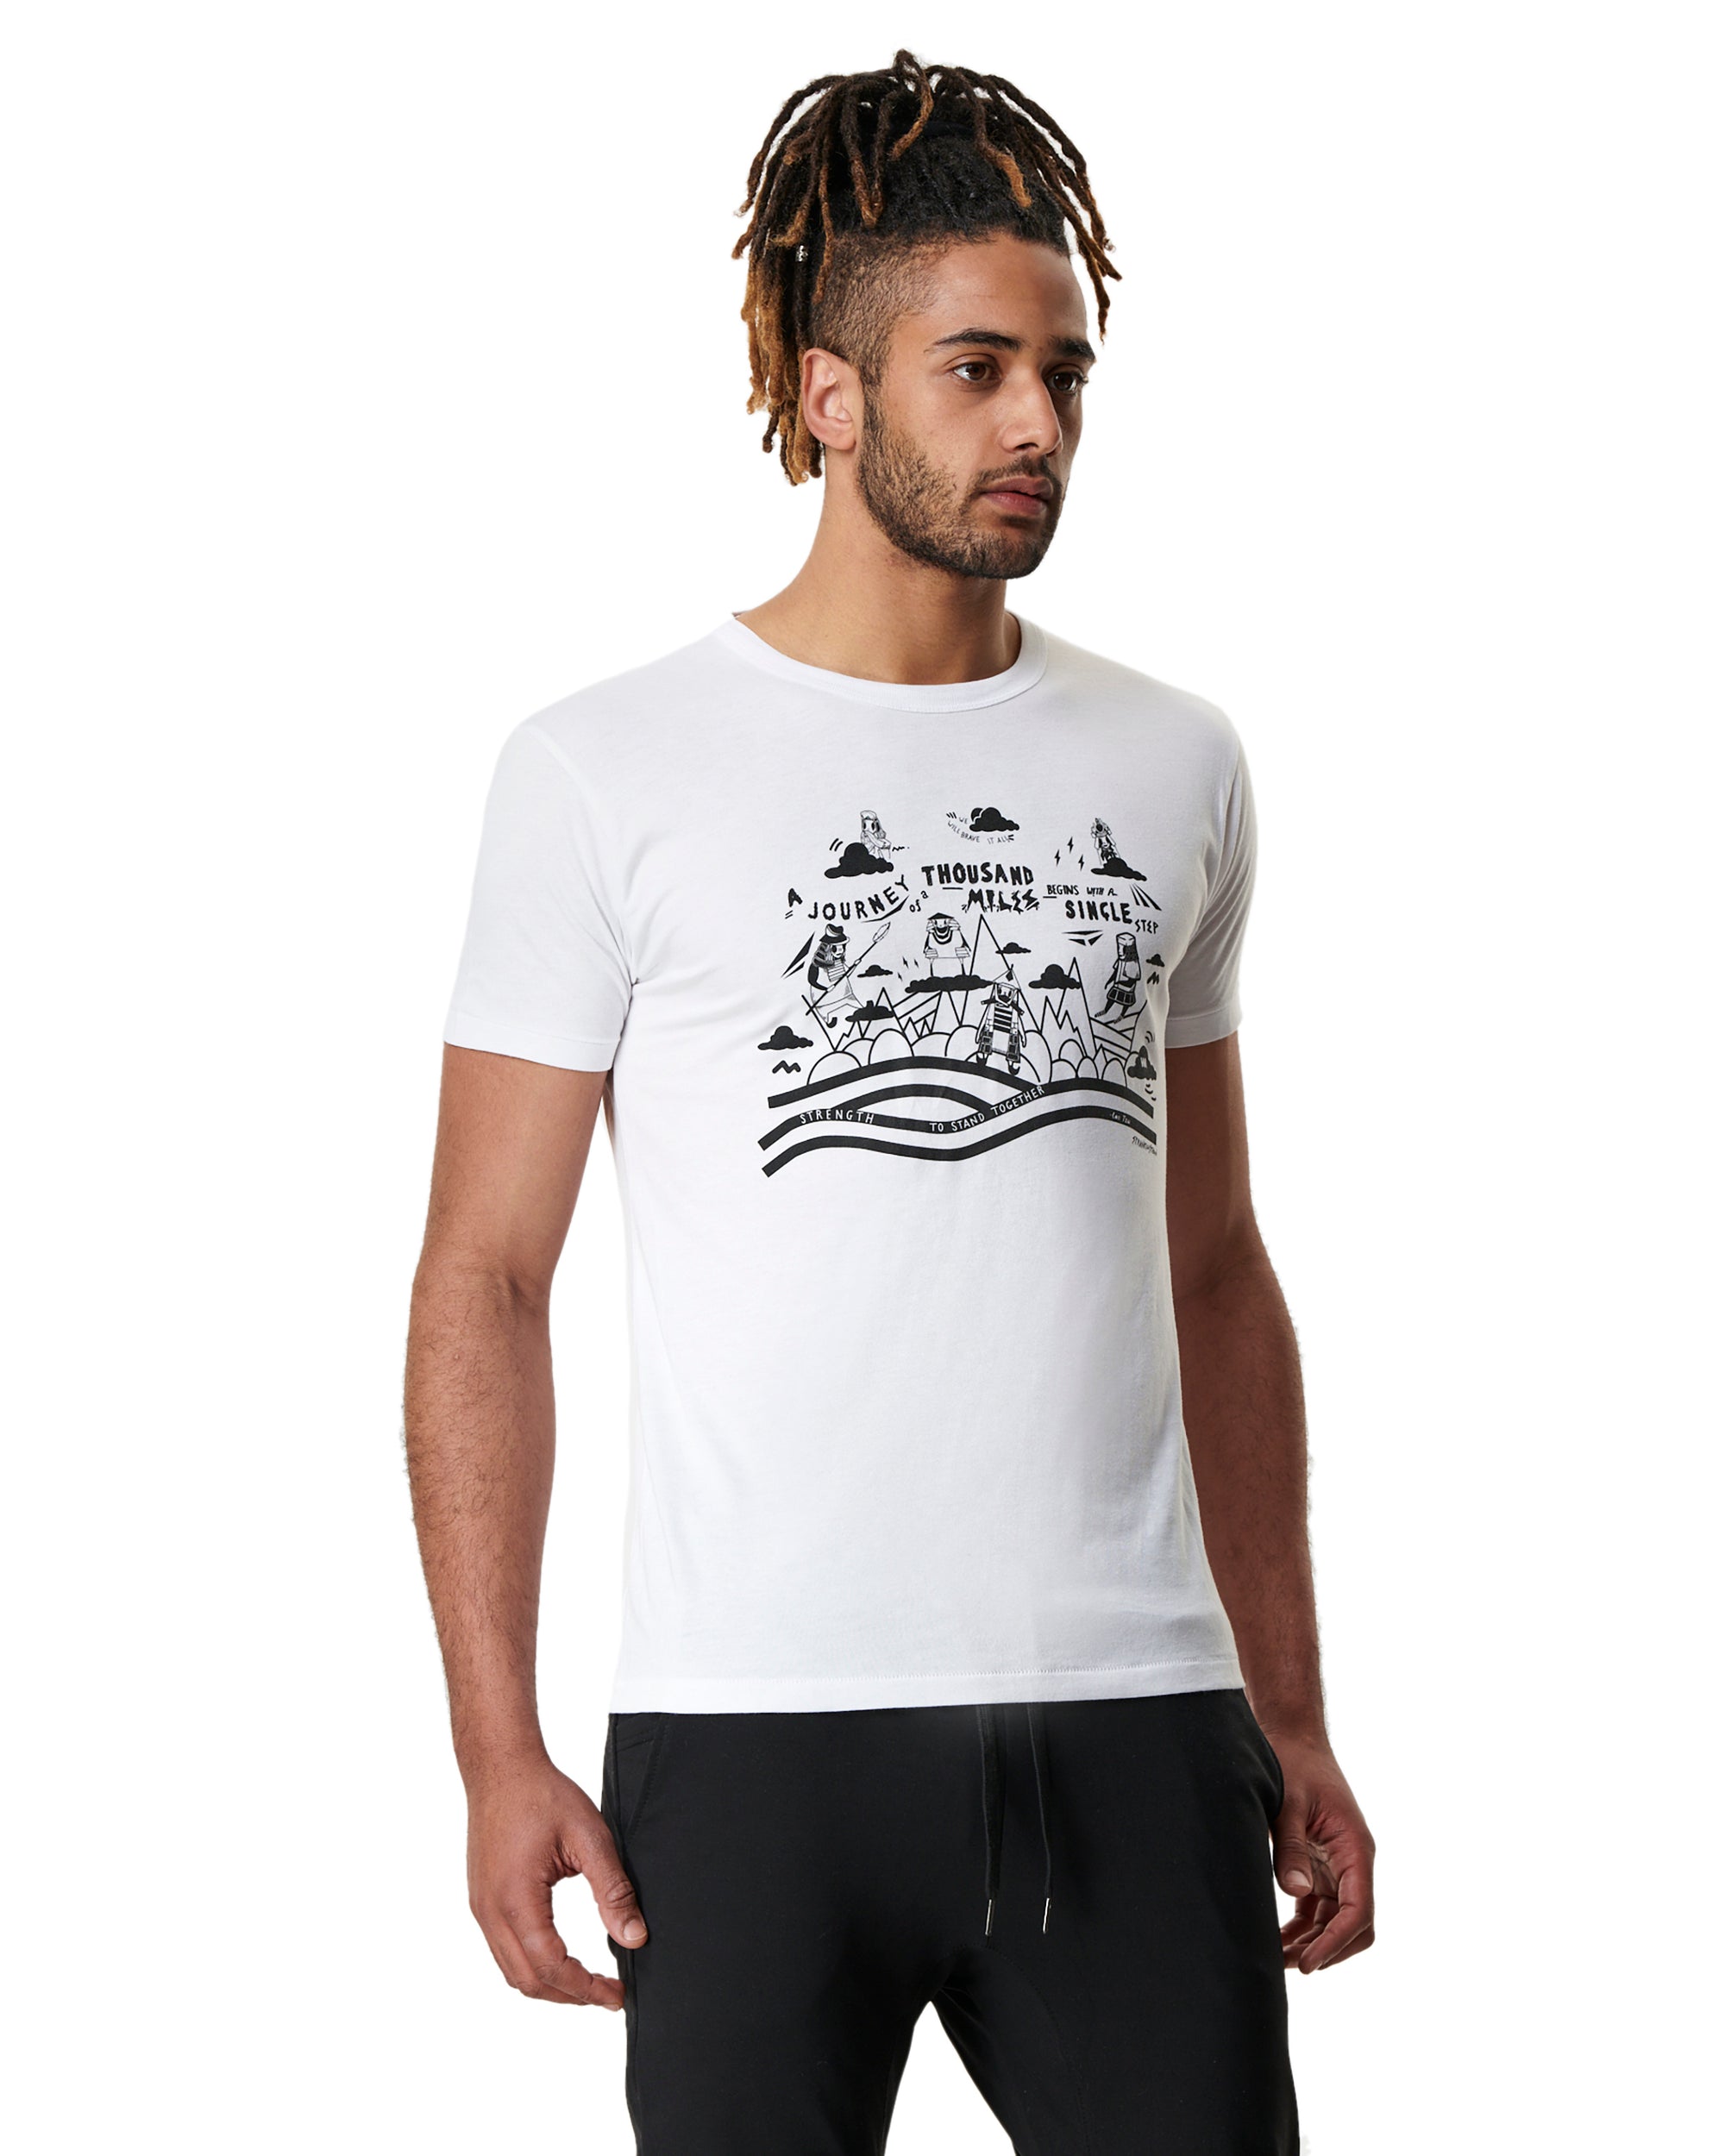 man in white mens yoga t-shirt by warrior additc with warrior print 